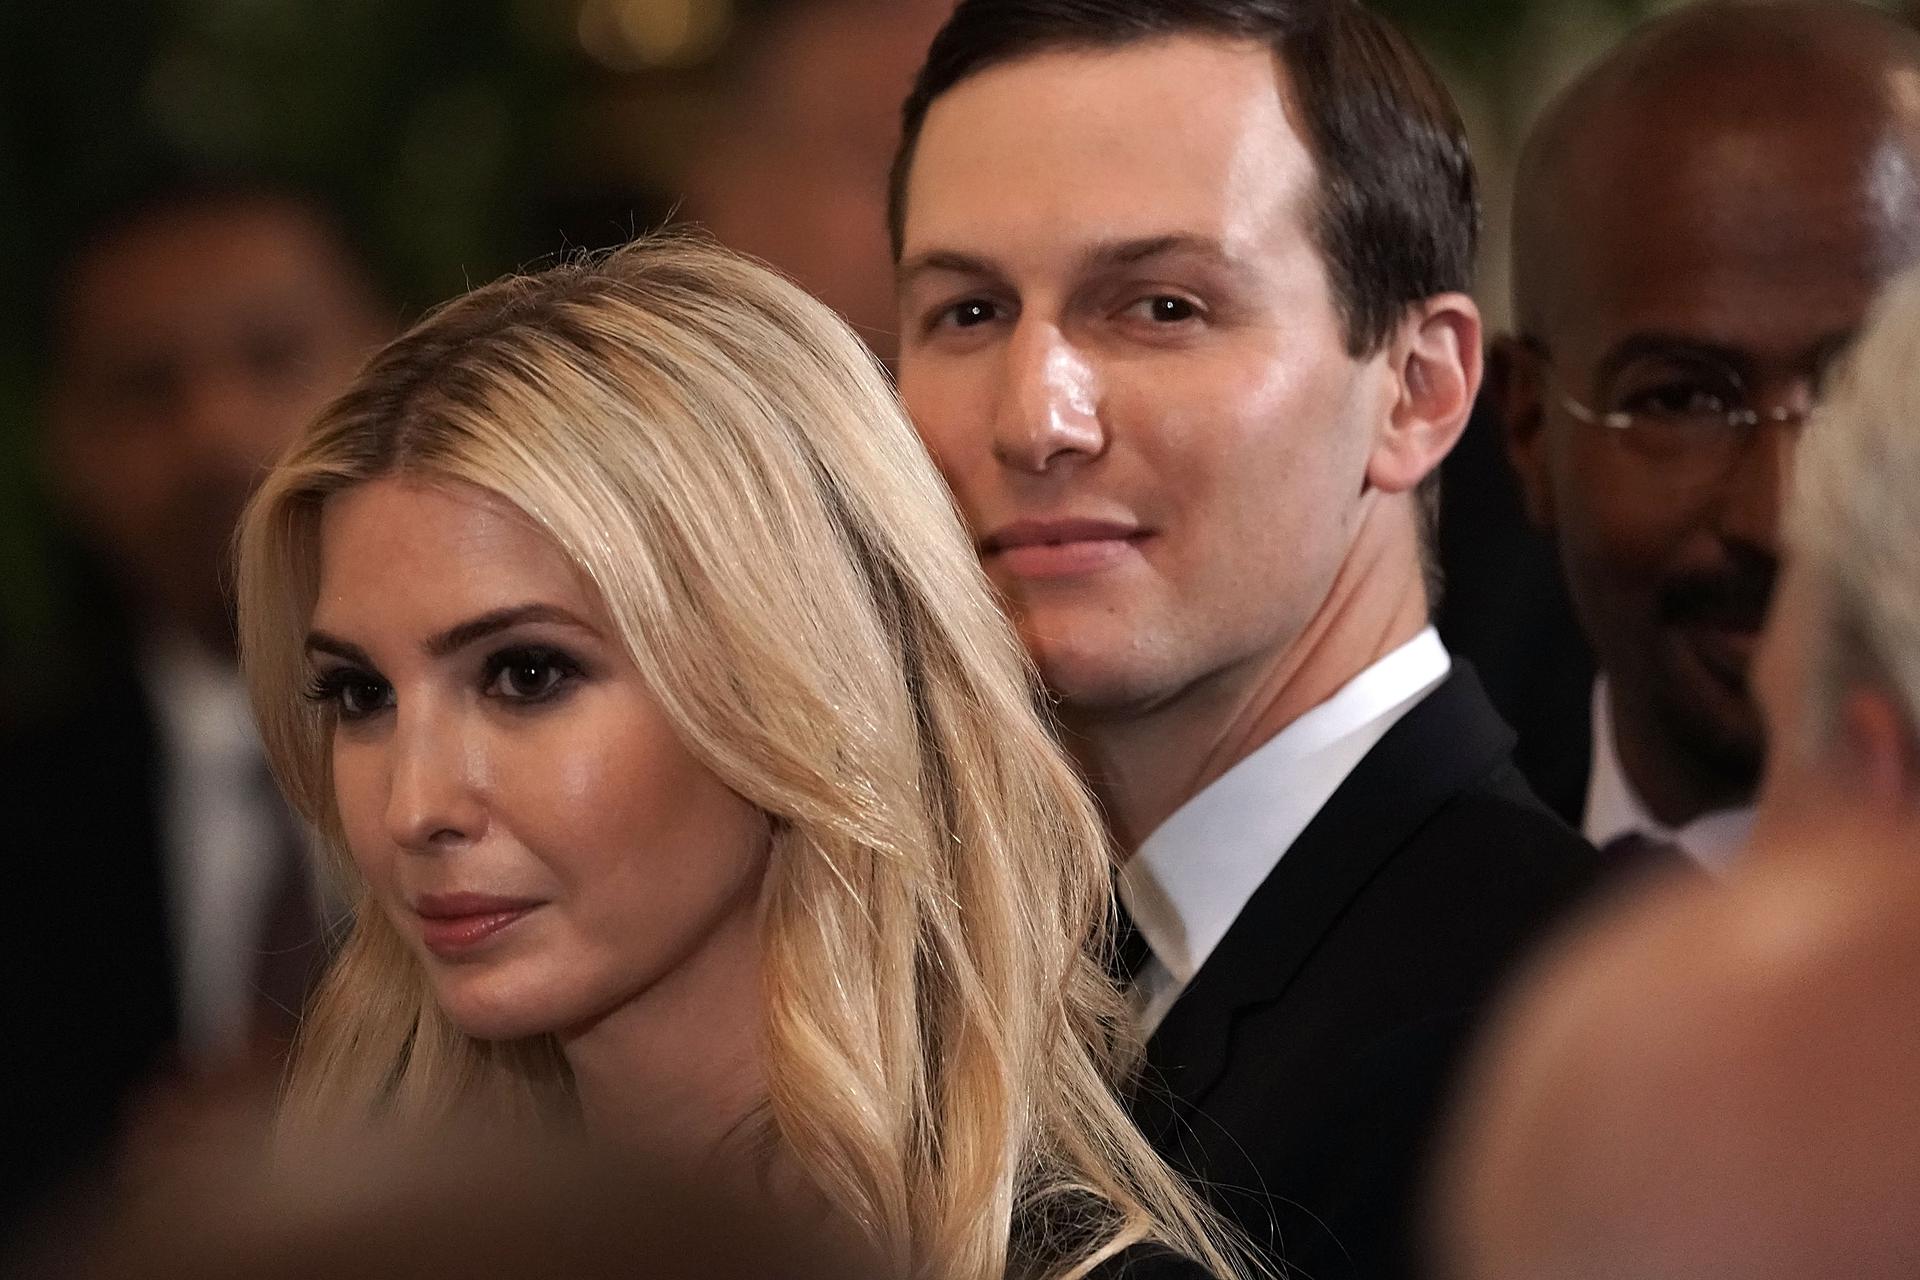 Jared Kushner and Ivanka Trump at a 2018 White House summit. (Alex Wong/Getty Images)